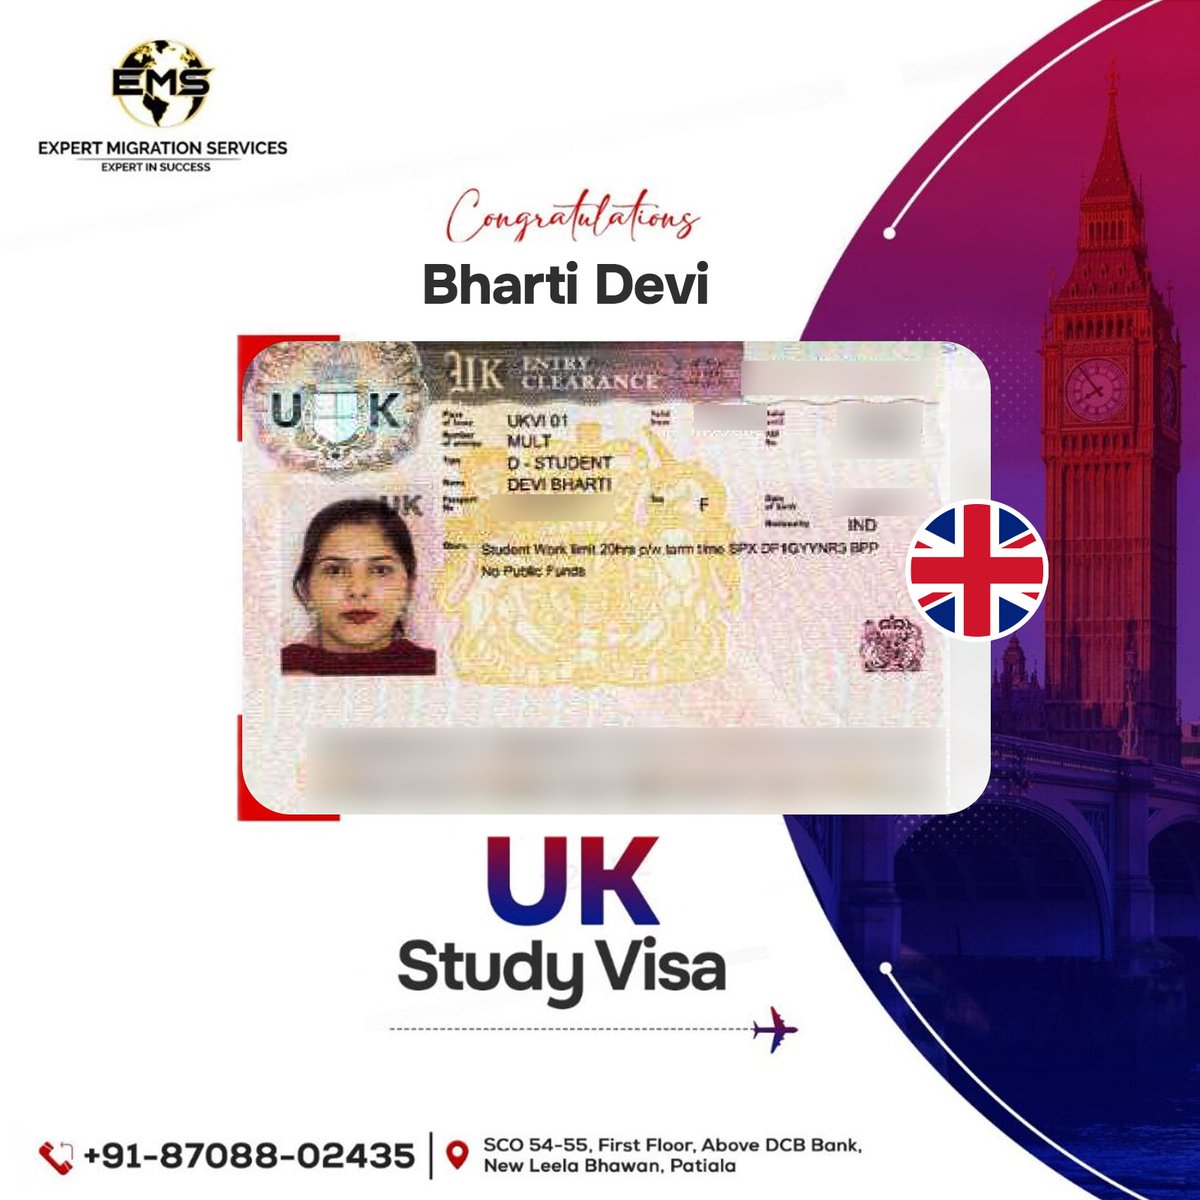 🇬🇧🎓 UK Study Visa Success Story: Bharti Devi's successful visa application with Expert Migration Services paves the way for her academic journey. 🚀

.
.
.
#ExpertMigrationServices #StudyinUK #SettleInUK #ImmigrationConsultant